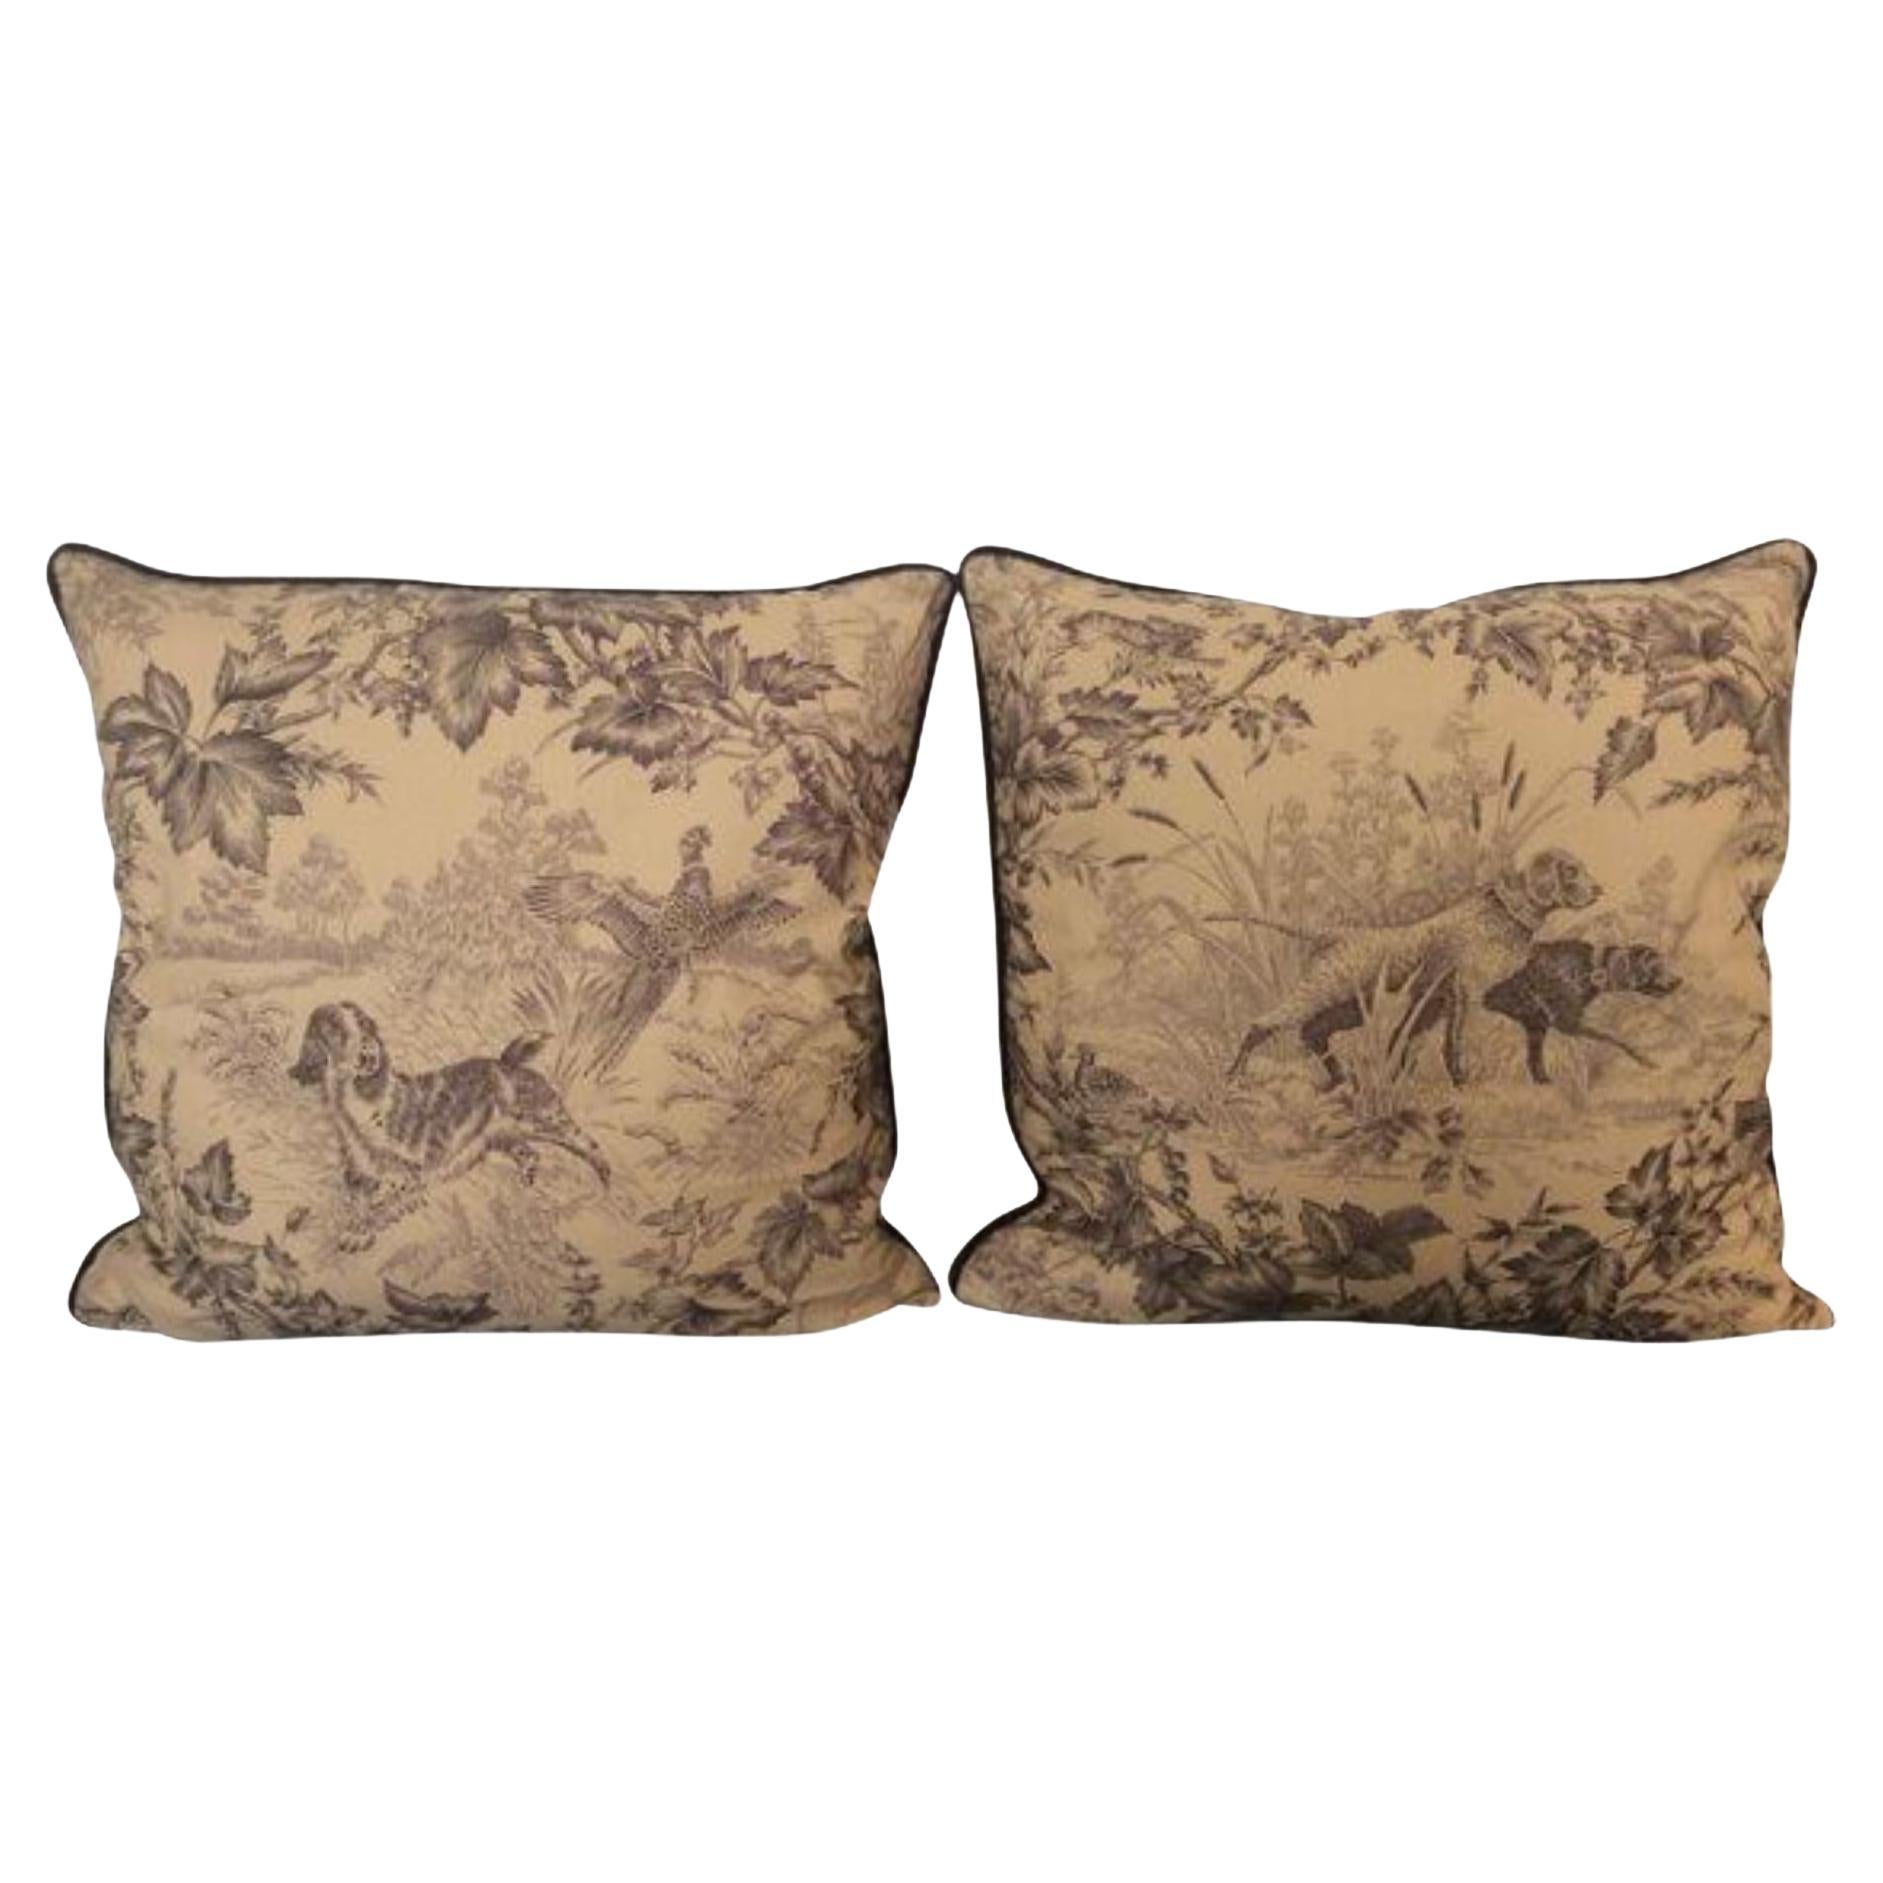 Brunschwig & Fils Hunting Toile in Tobacco & Cream Pillows - a Pair For Sale